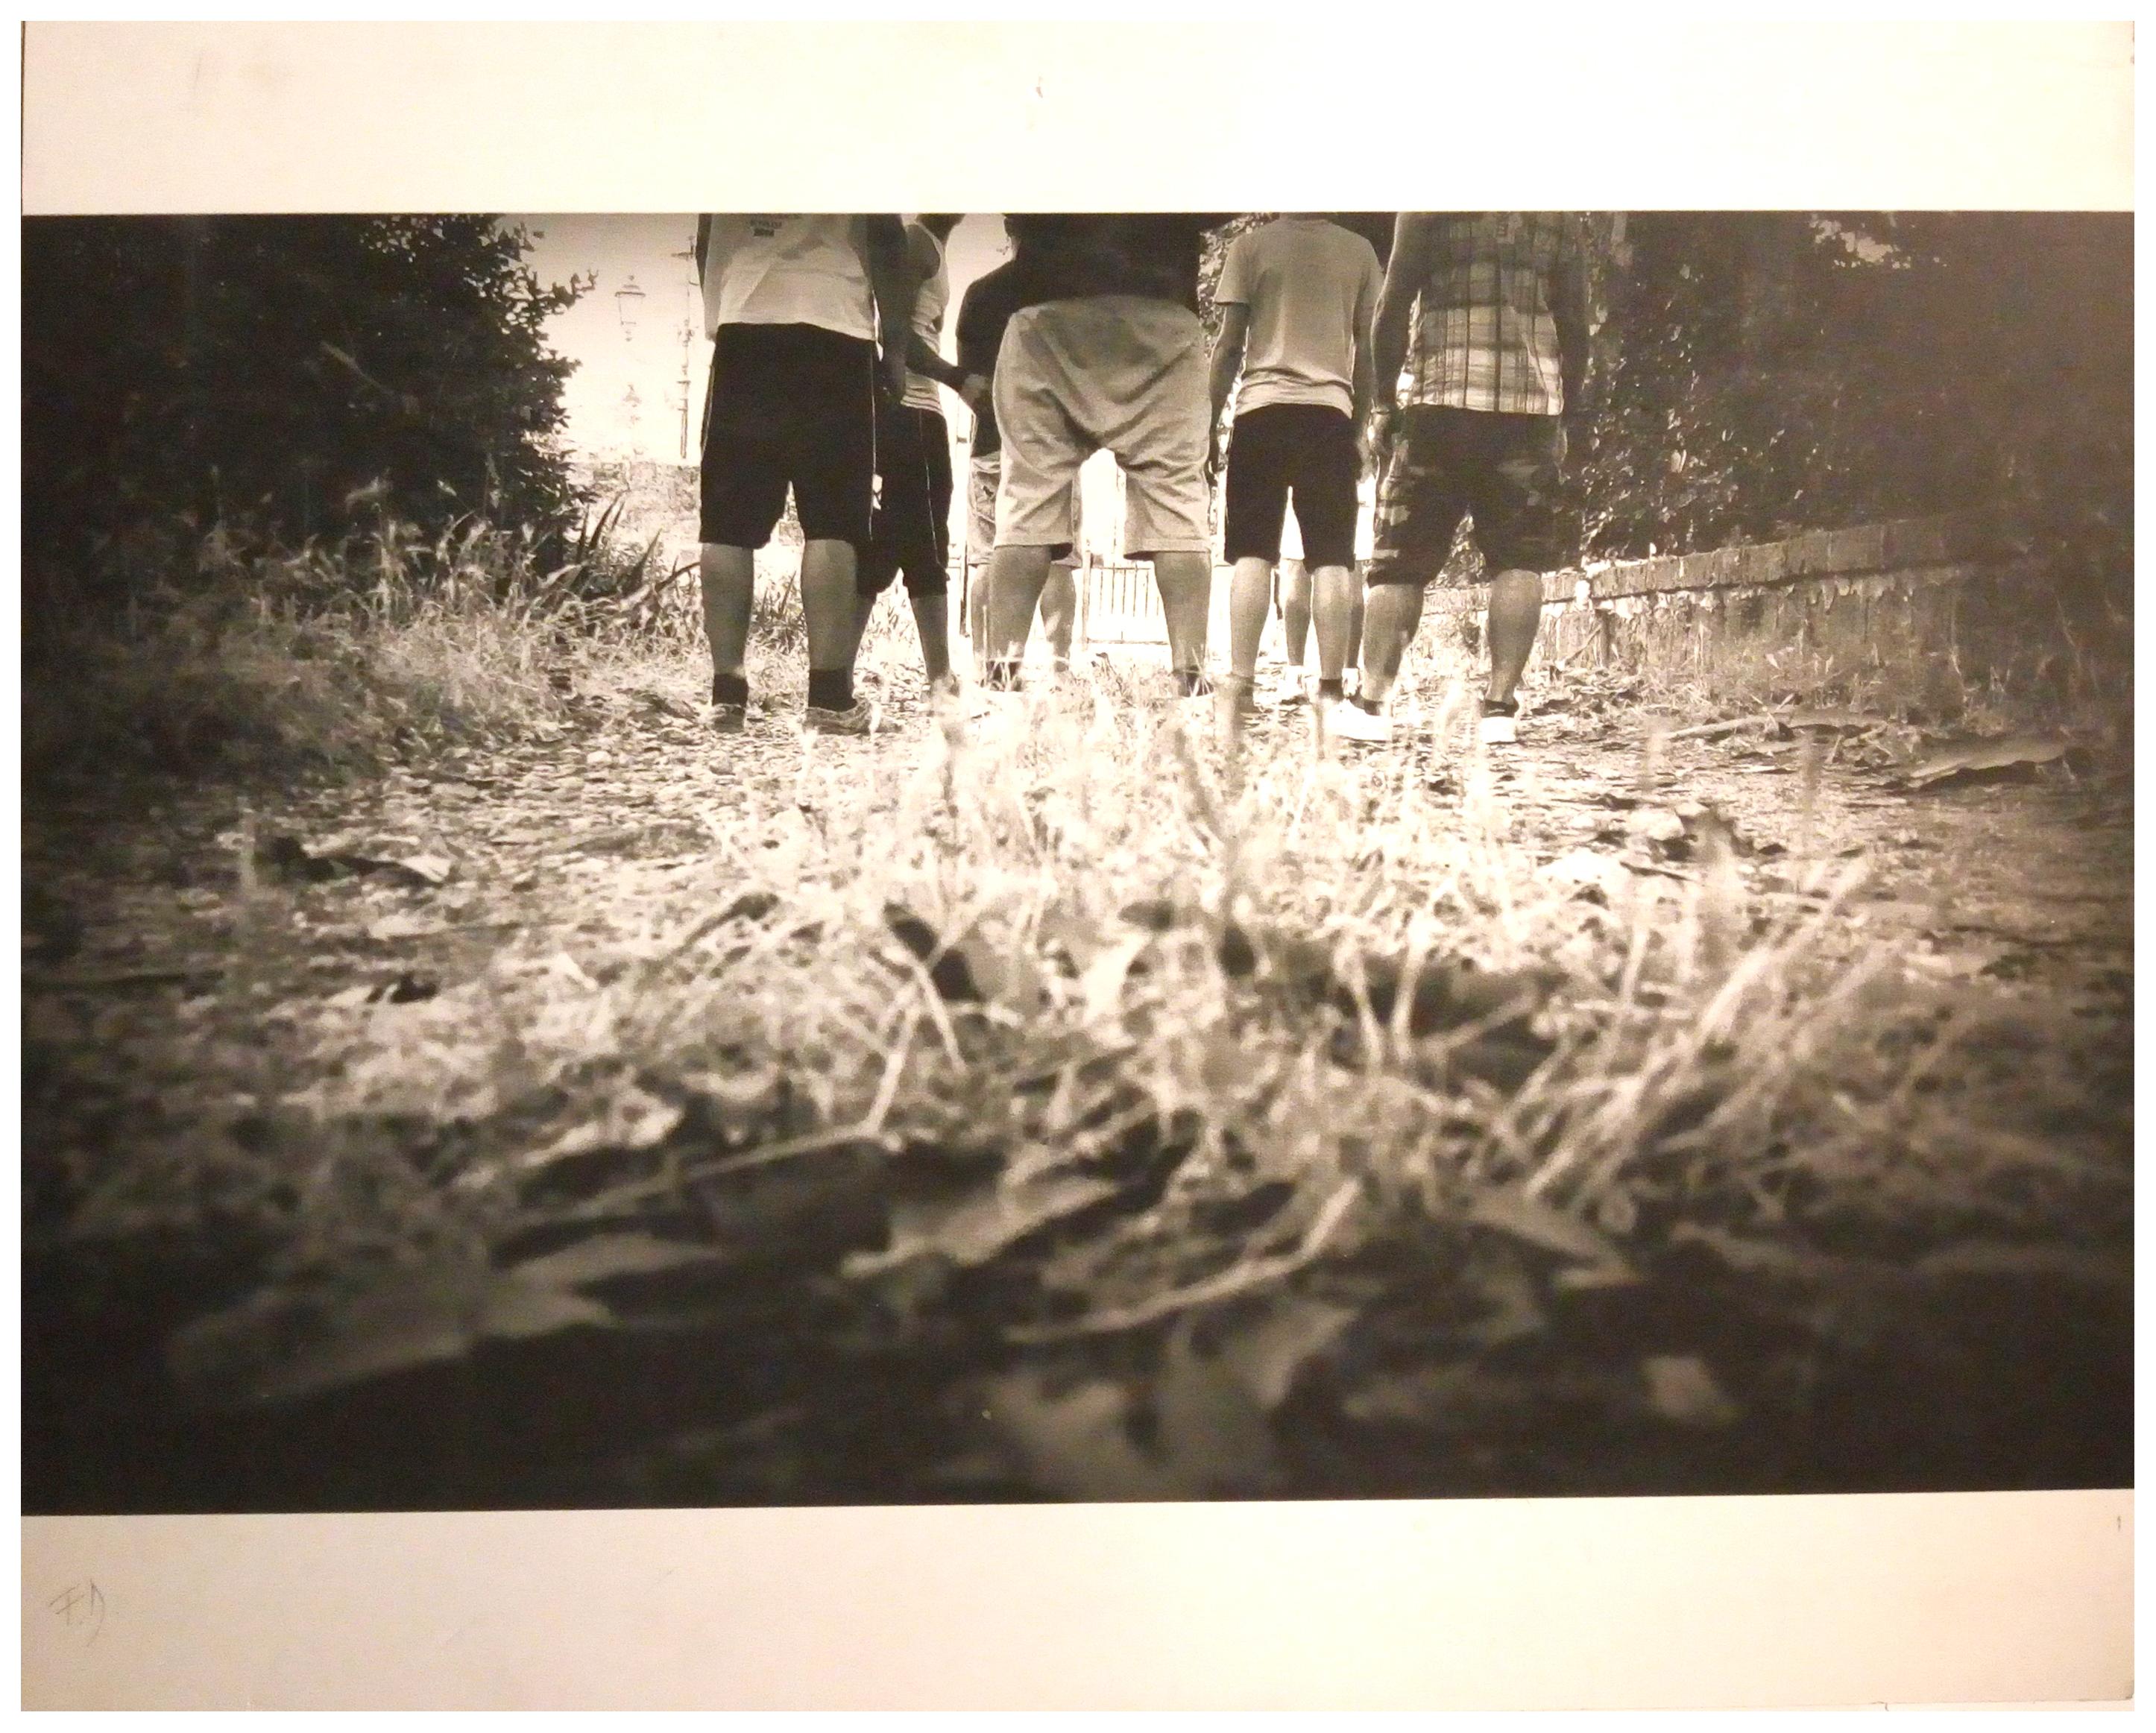 Unknown Black and White Photograph - BOYS - Photograph on baryta paper, Fabio Donato, Italy 2010